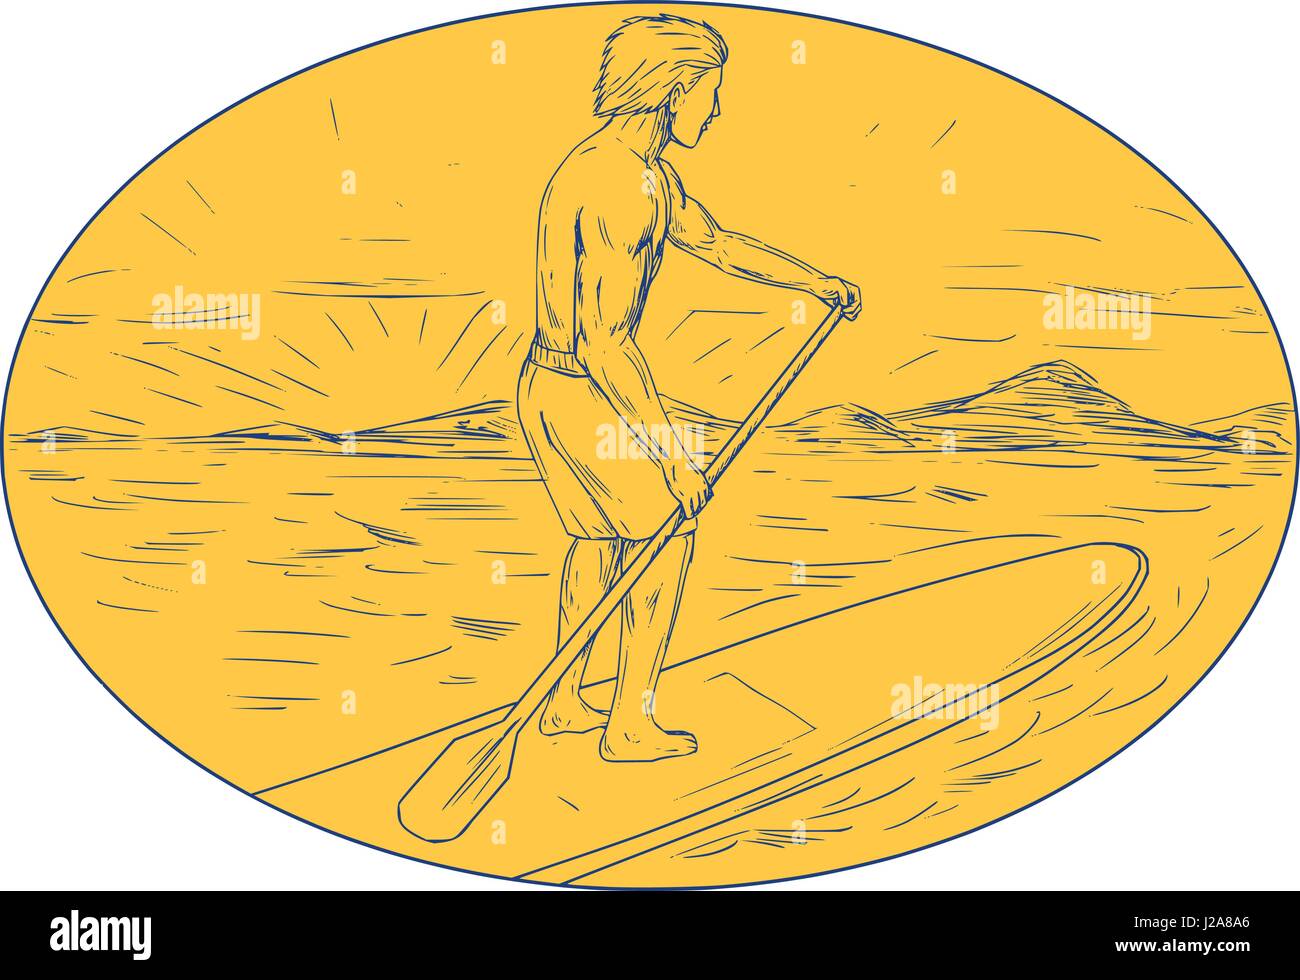 Drawing sketch style illustration of a dude on a stand up paddle board holding paddling oar with island and sunset in the background done set inside o Stock Vector